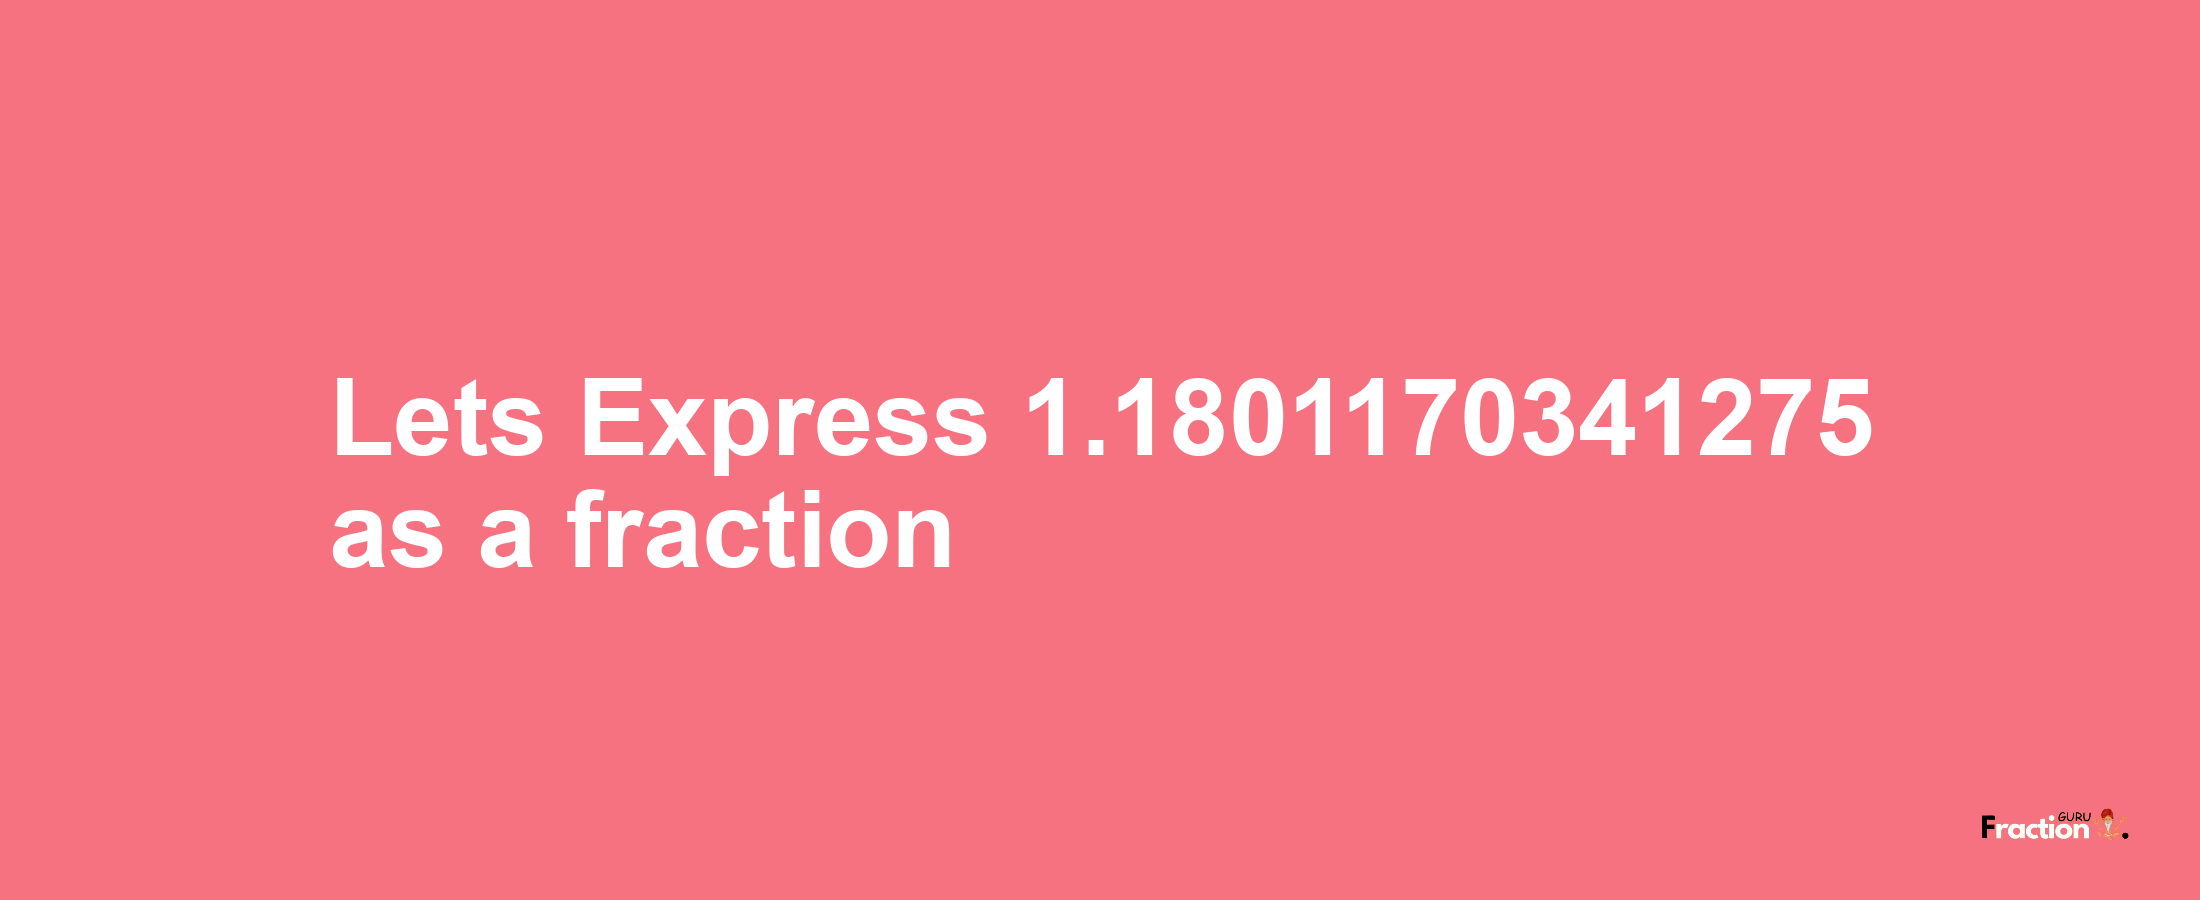 Lets Express 1.1801170341275 as afraction